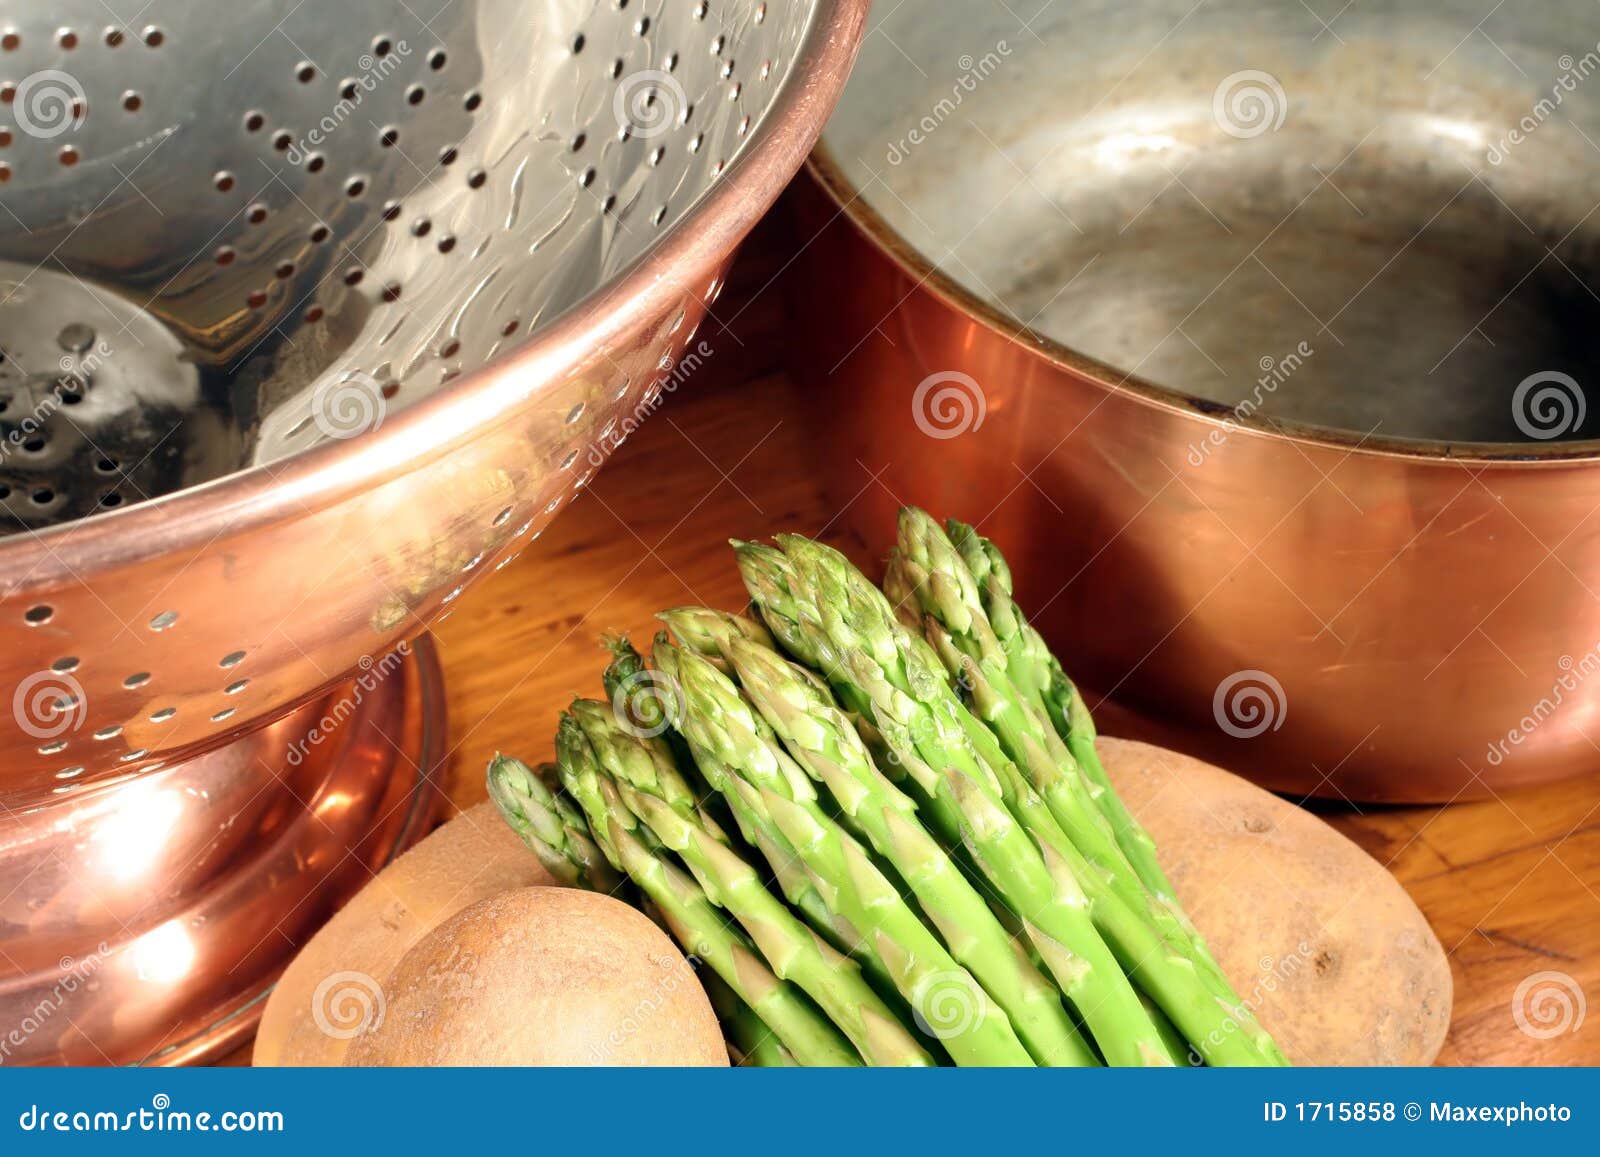 Copper Cookware And Vegetables Royalty Free Stock Photos - Image: 1715858